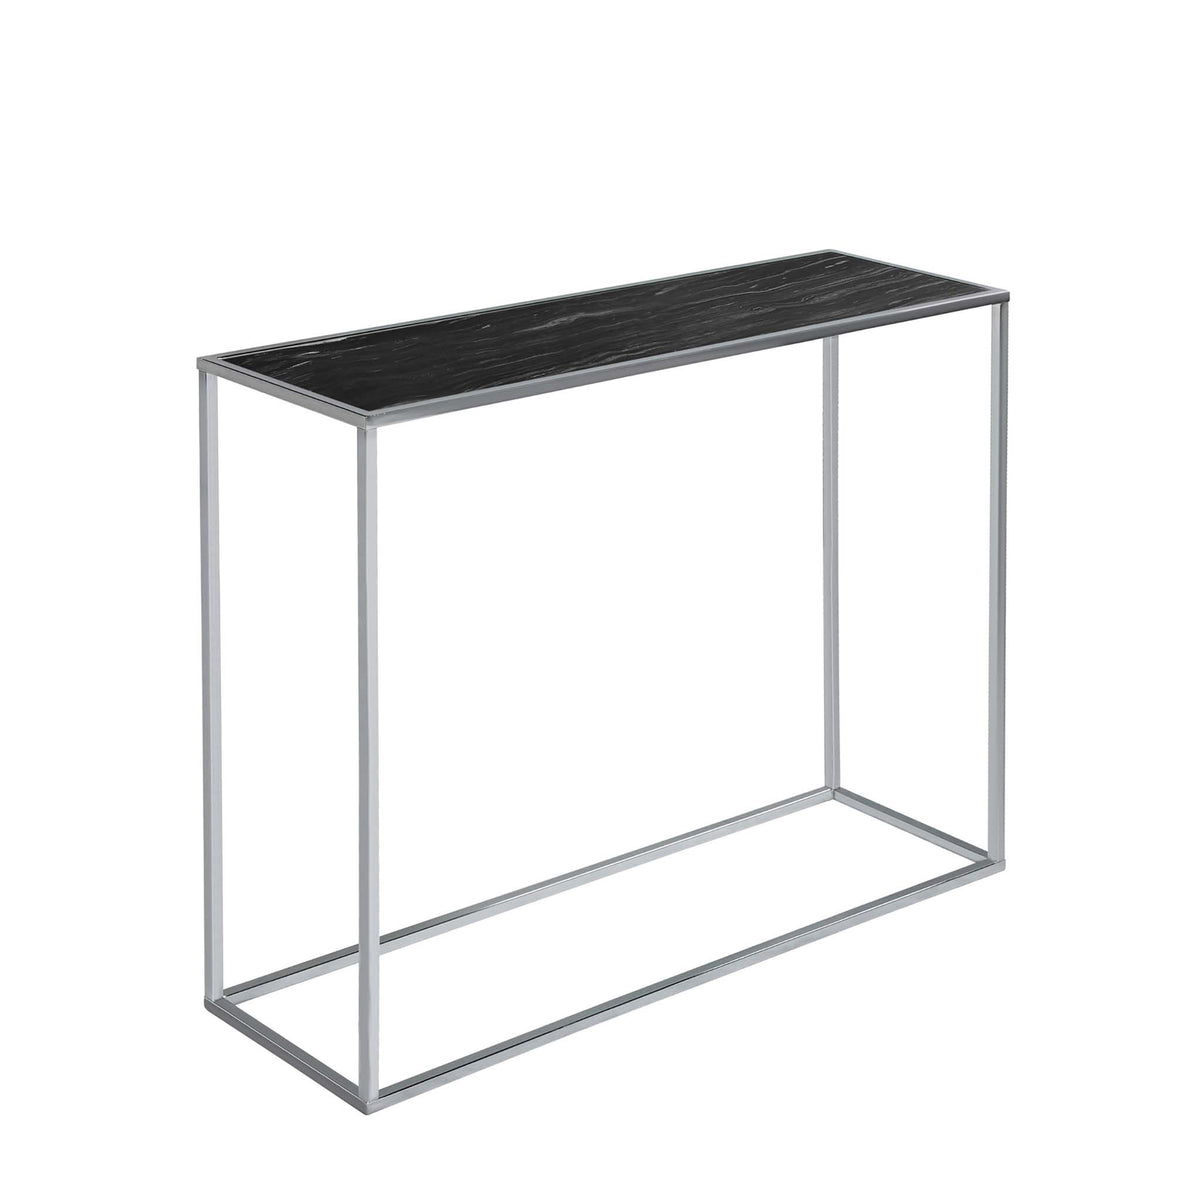 Zoey Black Marble and Chrome Console Table from Roseland Furniture